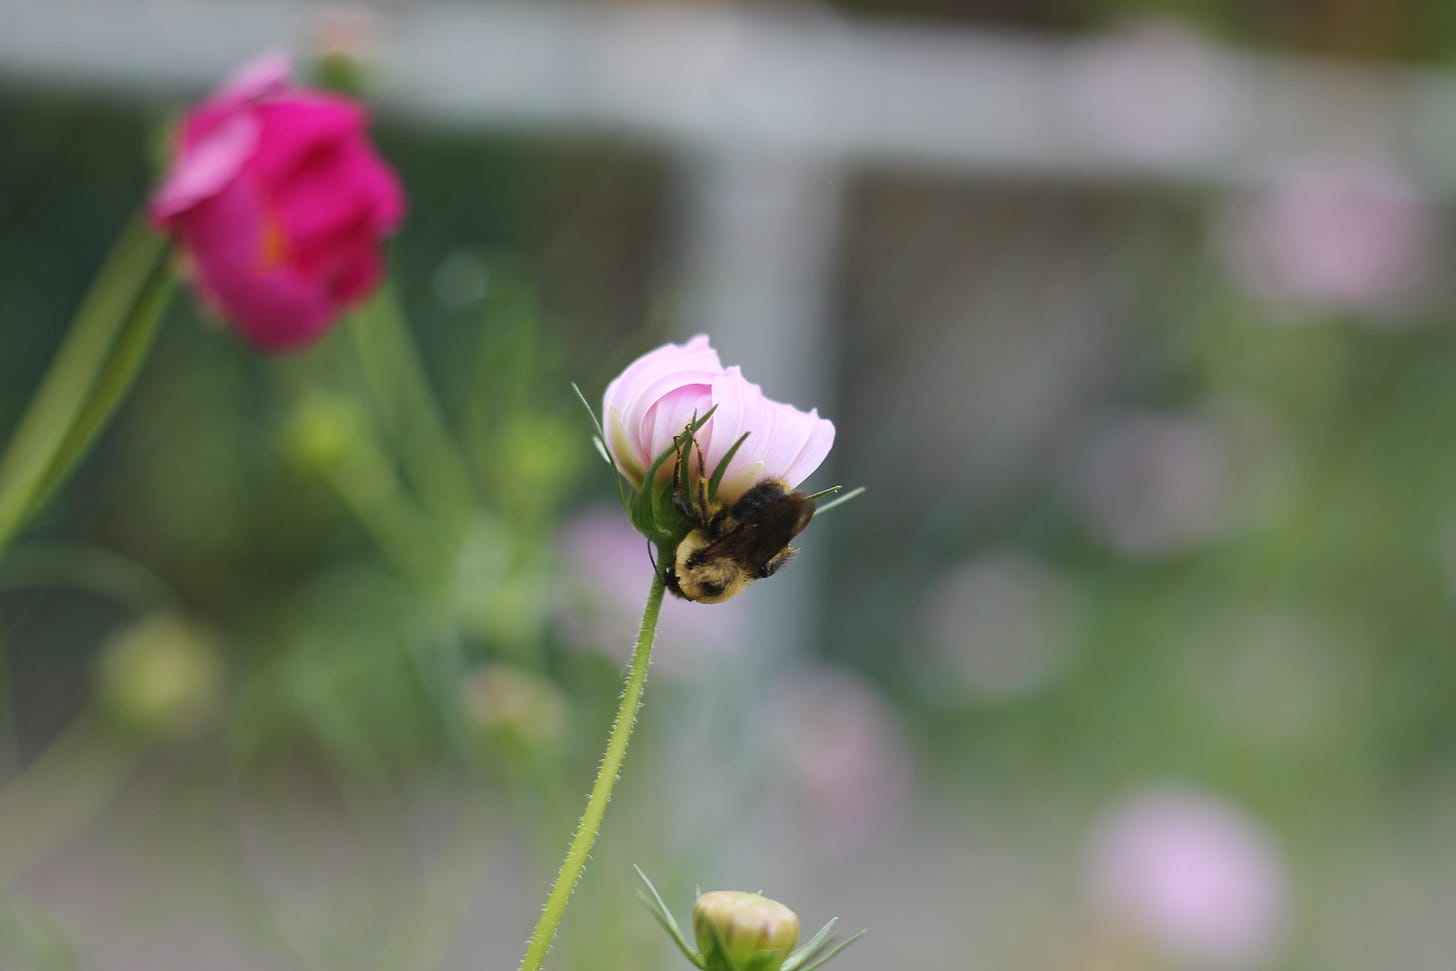 A bumblebee hangs upside down underneath a pink cosmo flower that is just about to unfurl.